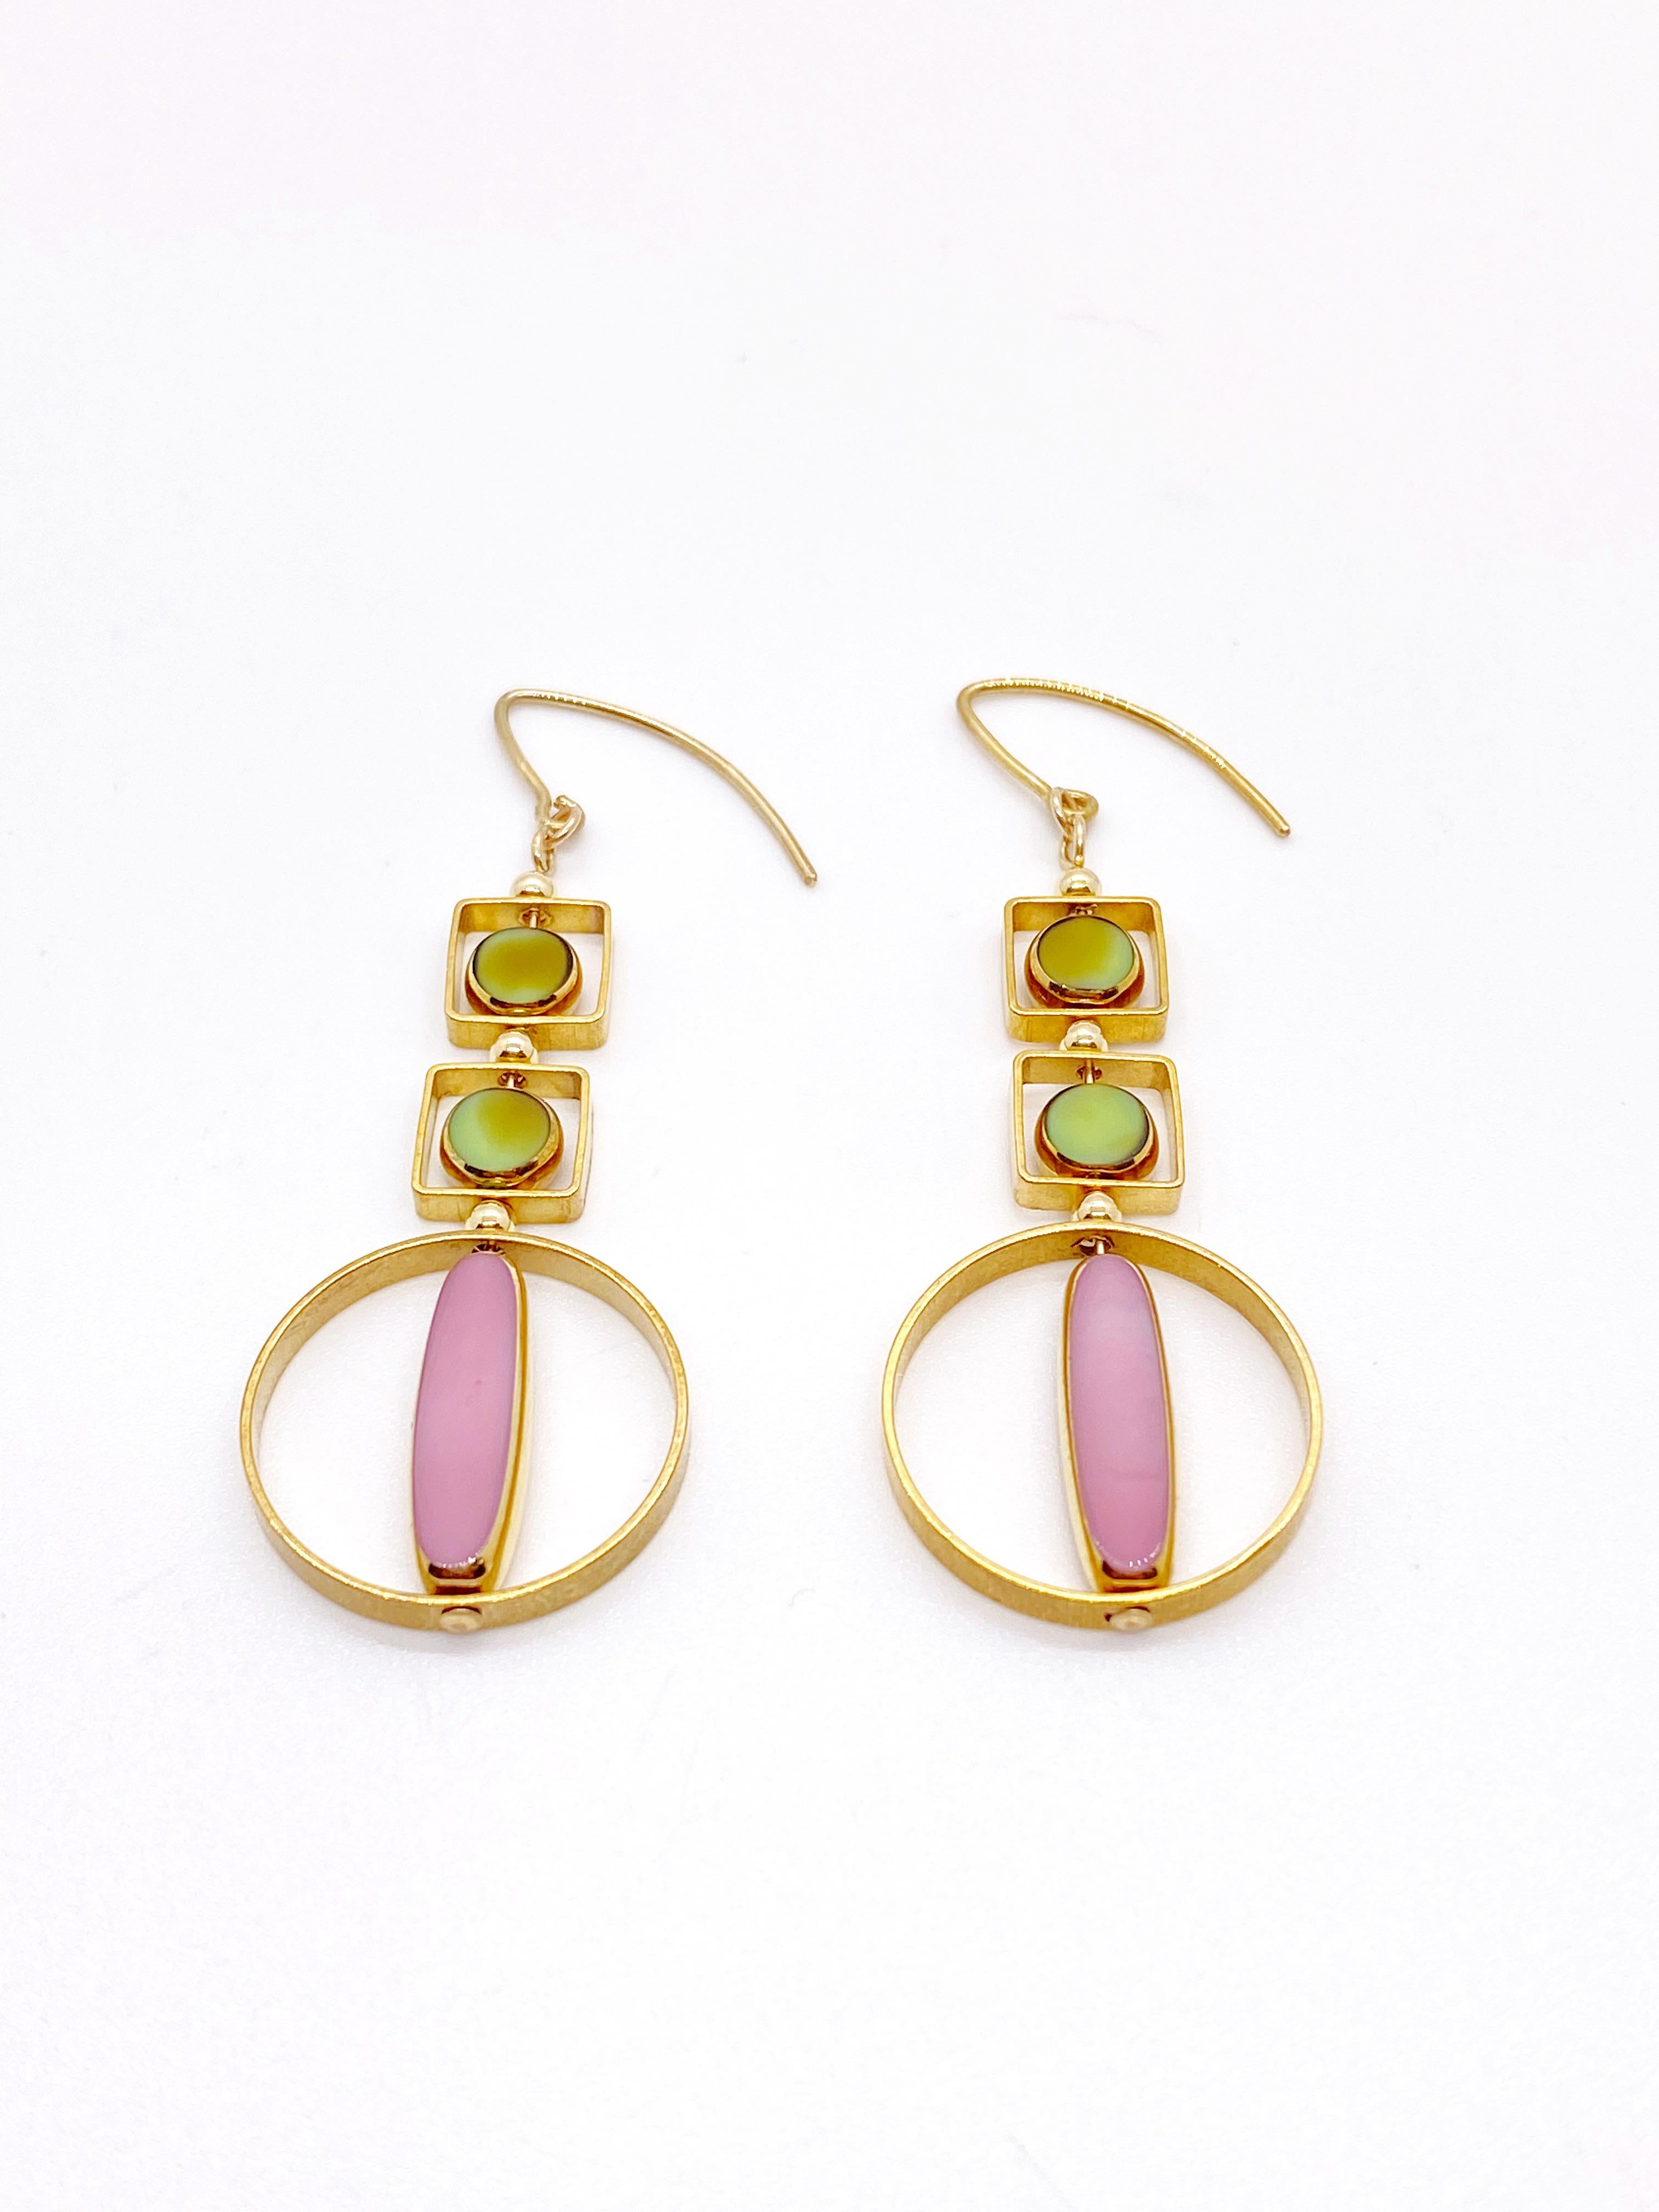 This is for a set of earrings. The earrings consist of pink oblong and marbled green mini circle shaped beads. They are new old stock vintage German glass beads that are framed with 24K gold. The beads were hand pressed during the 1920s-1960s. No